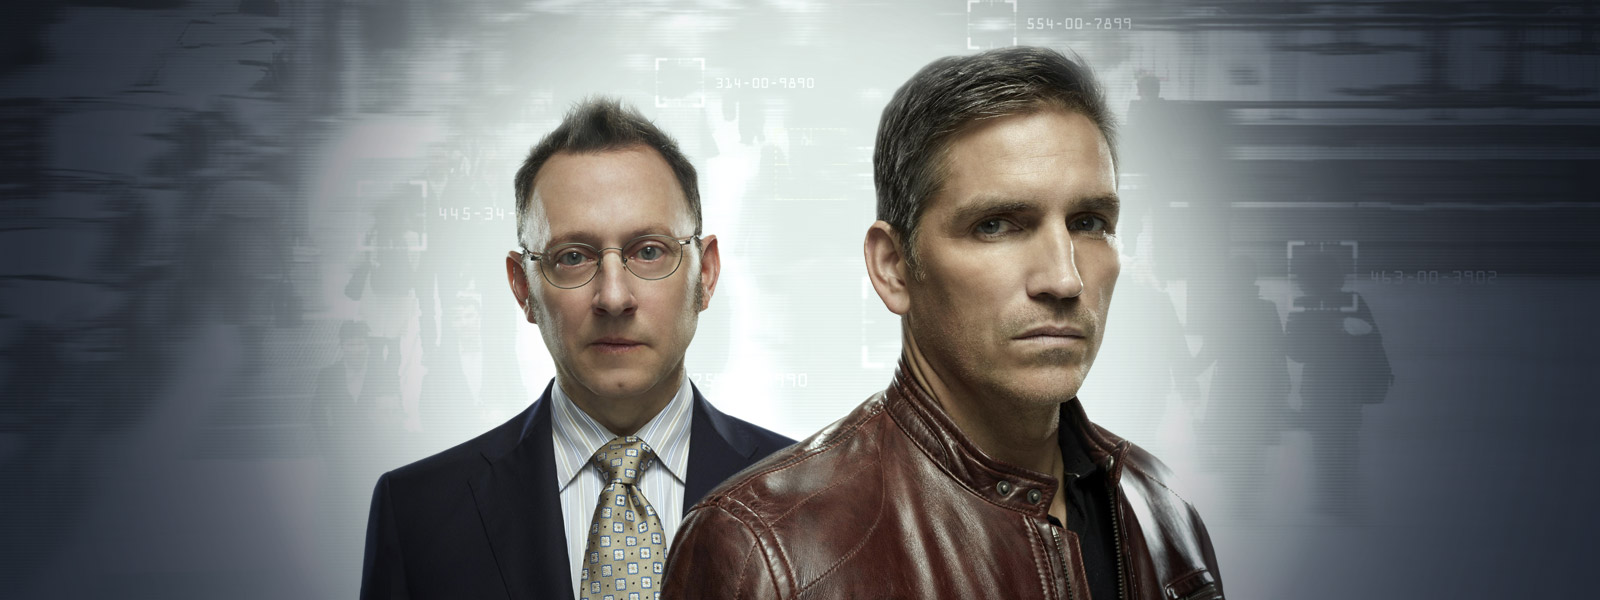 Review: Person of Interest 3.17- “Root Path”